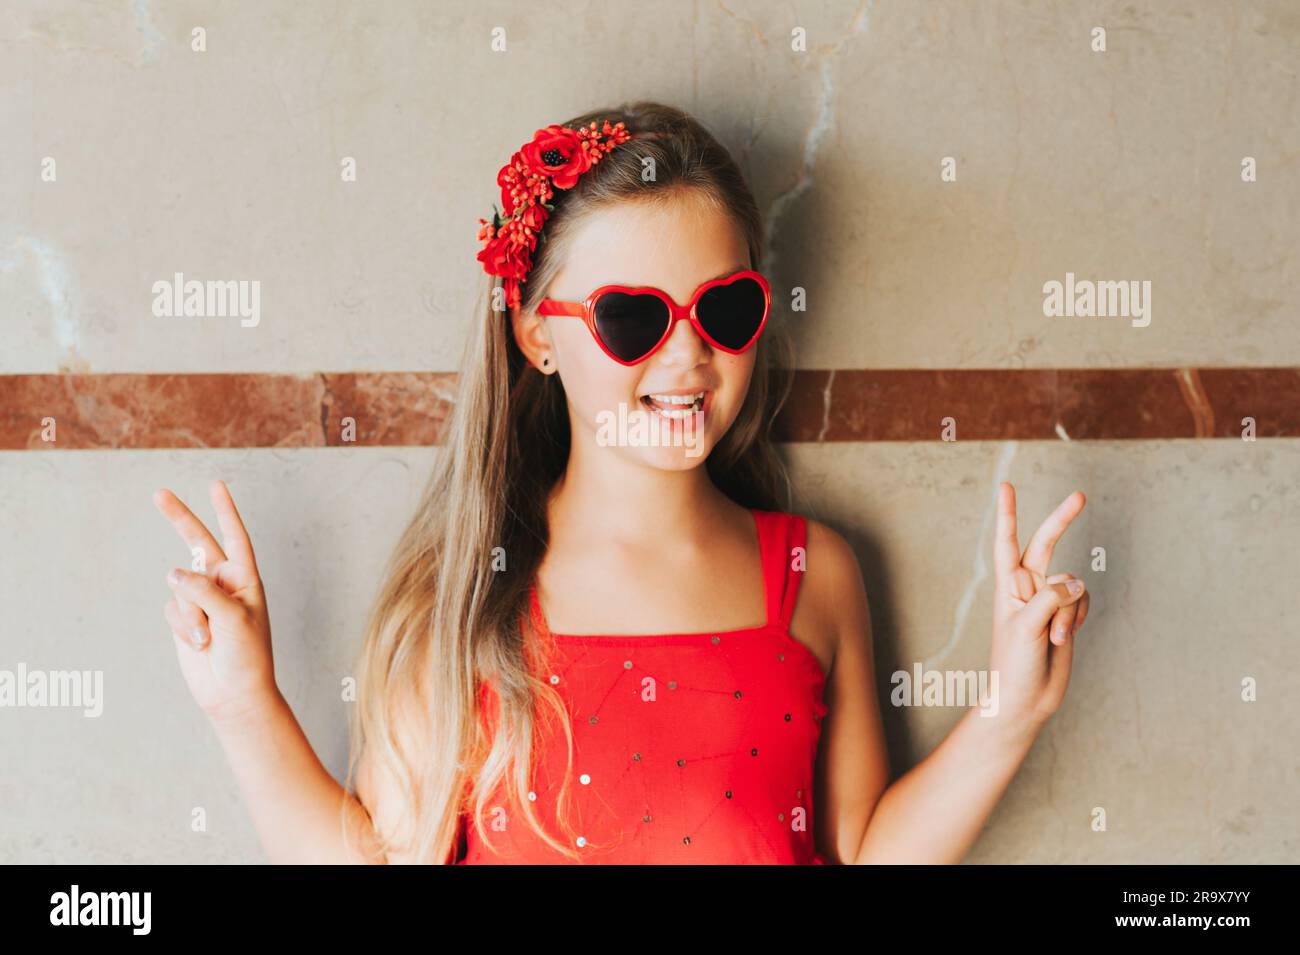 Funny portrait of pretty little girl wearing red dress and heart shaped sunglasses Stock Photo